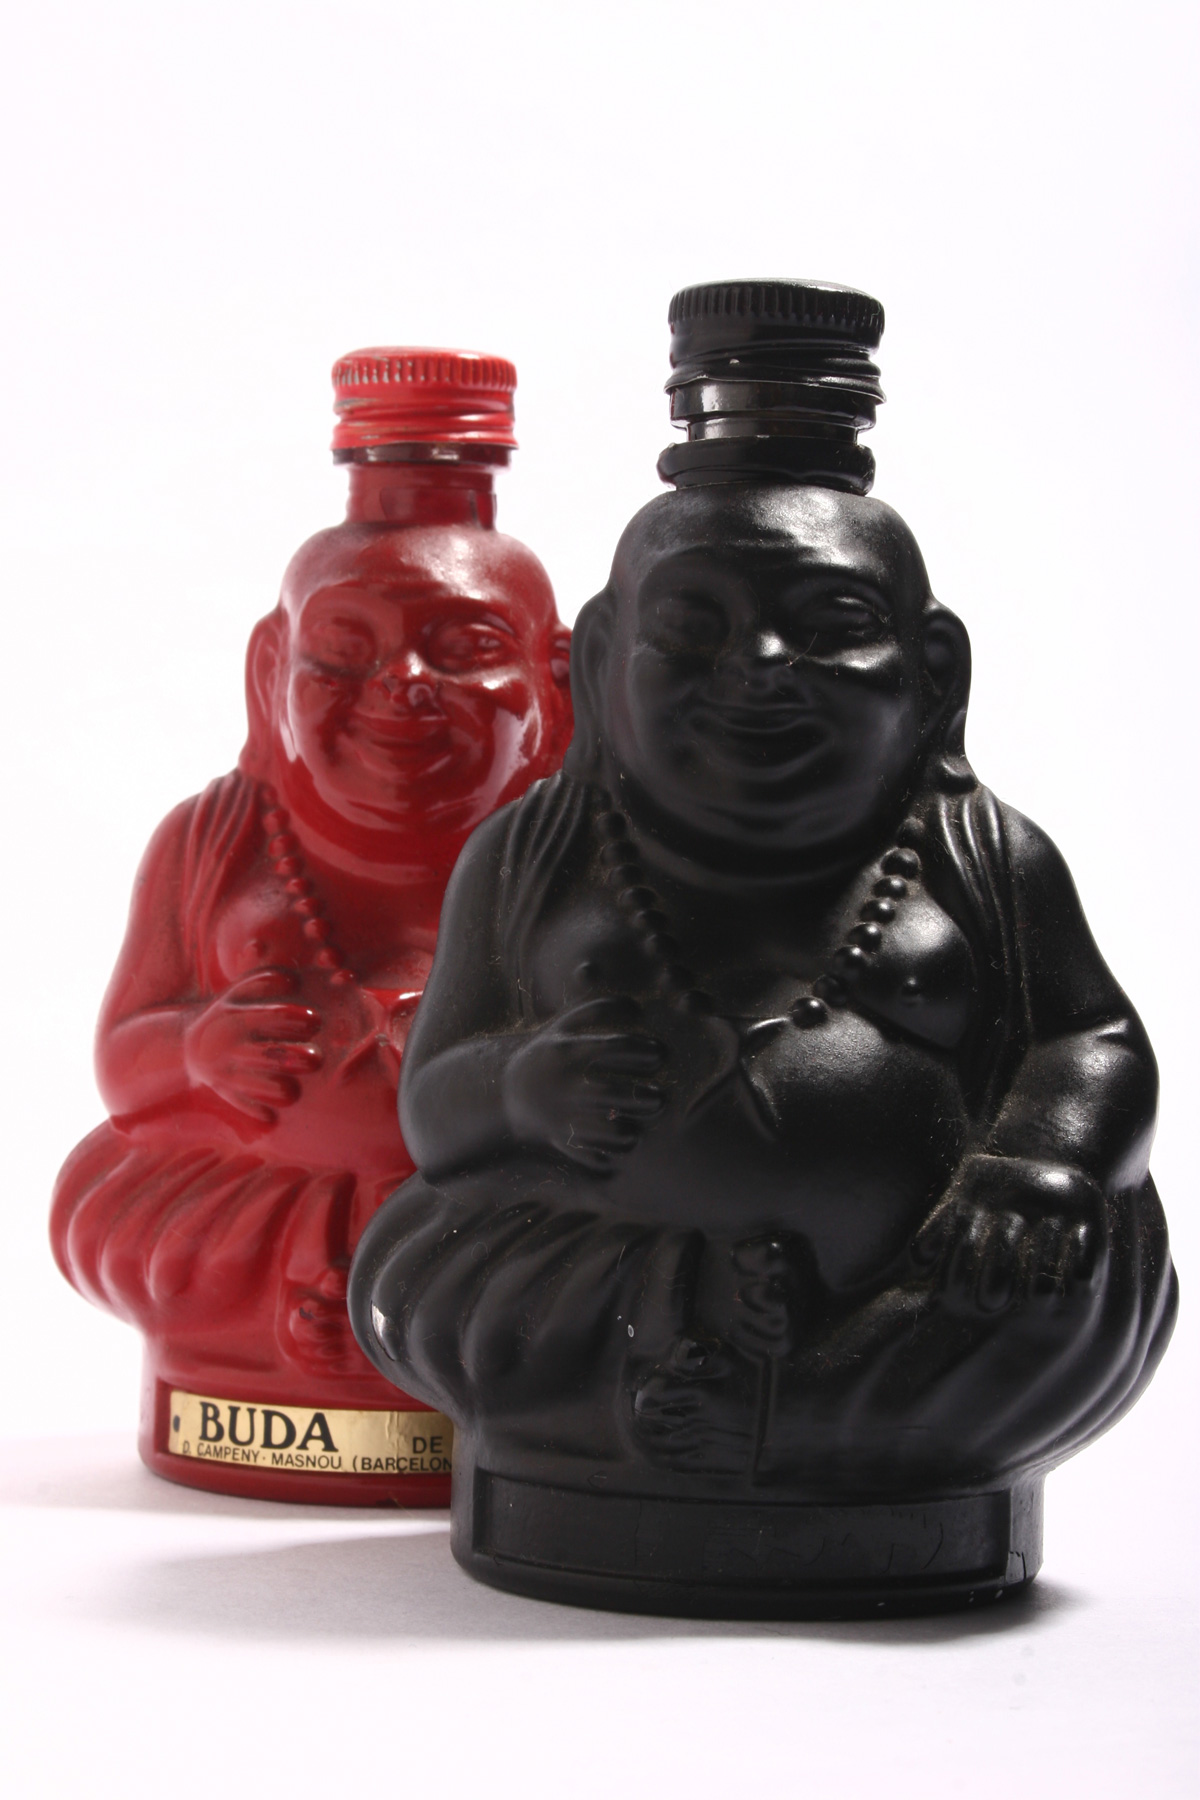 Two bottles in the shape of Buddha